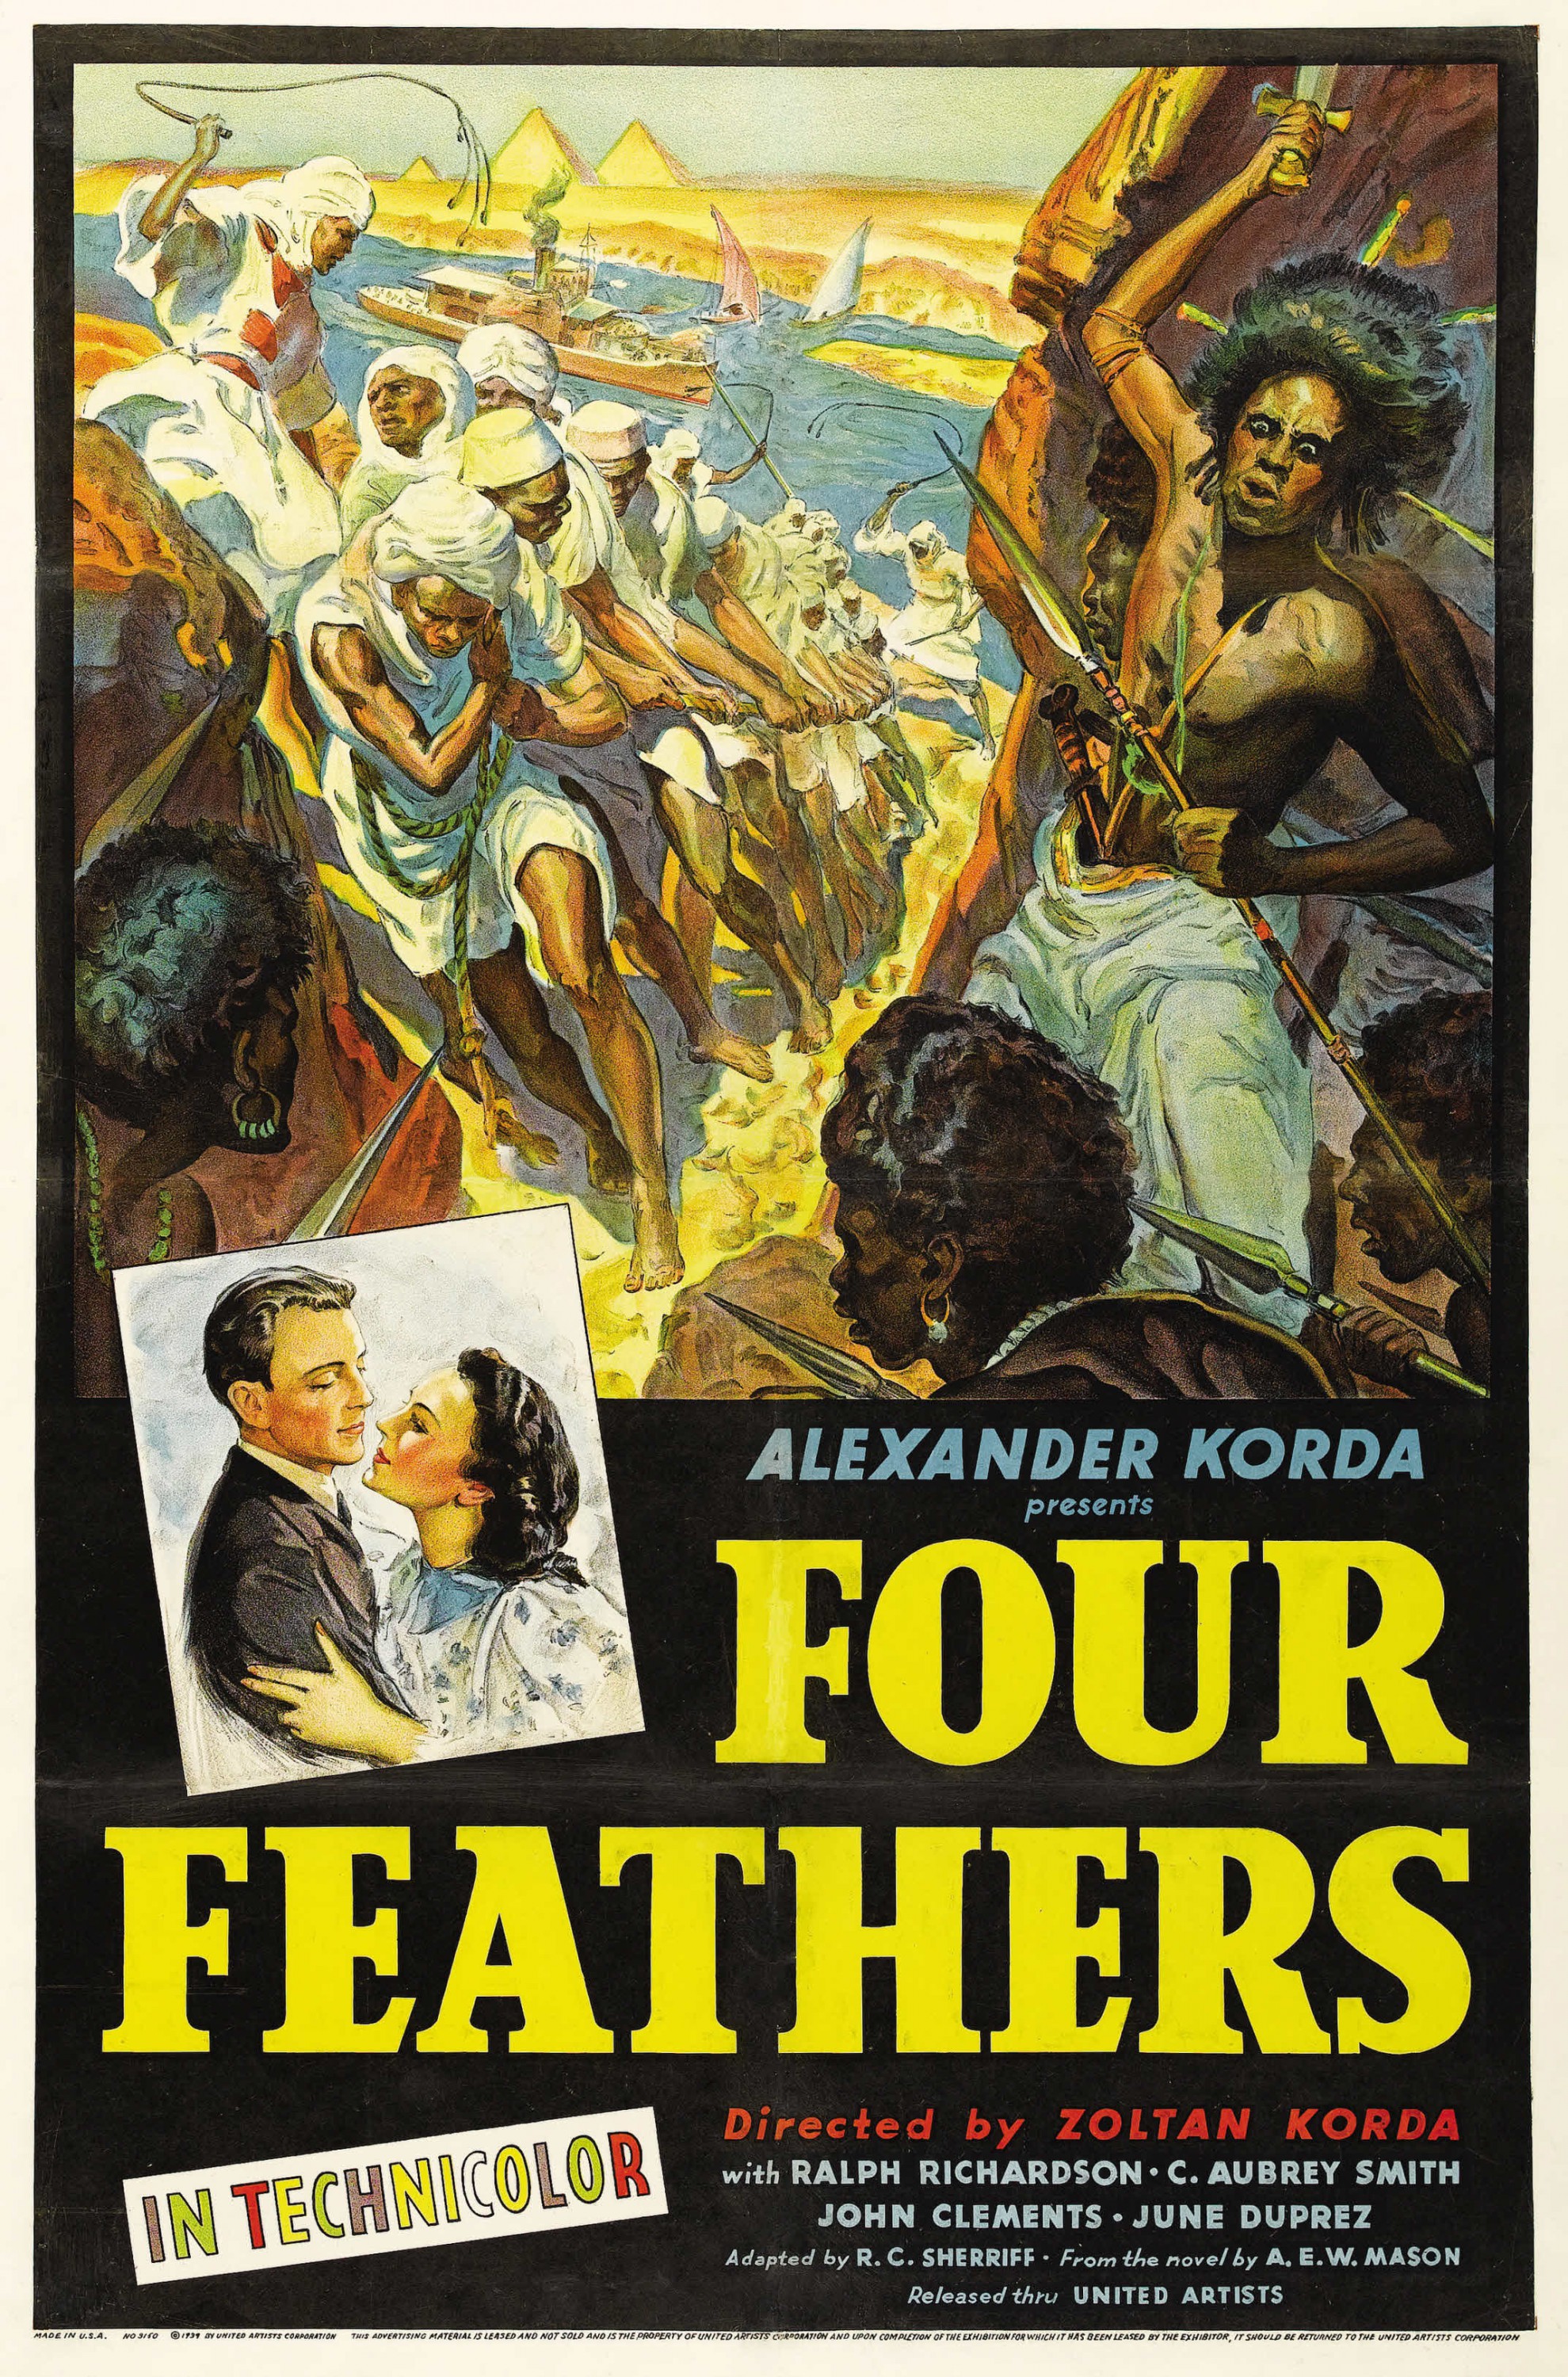 Mega Sized Movie Poster Image for The Four Feathers 